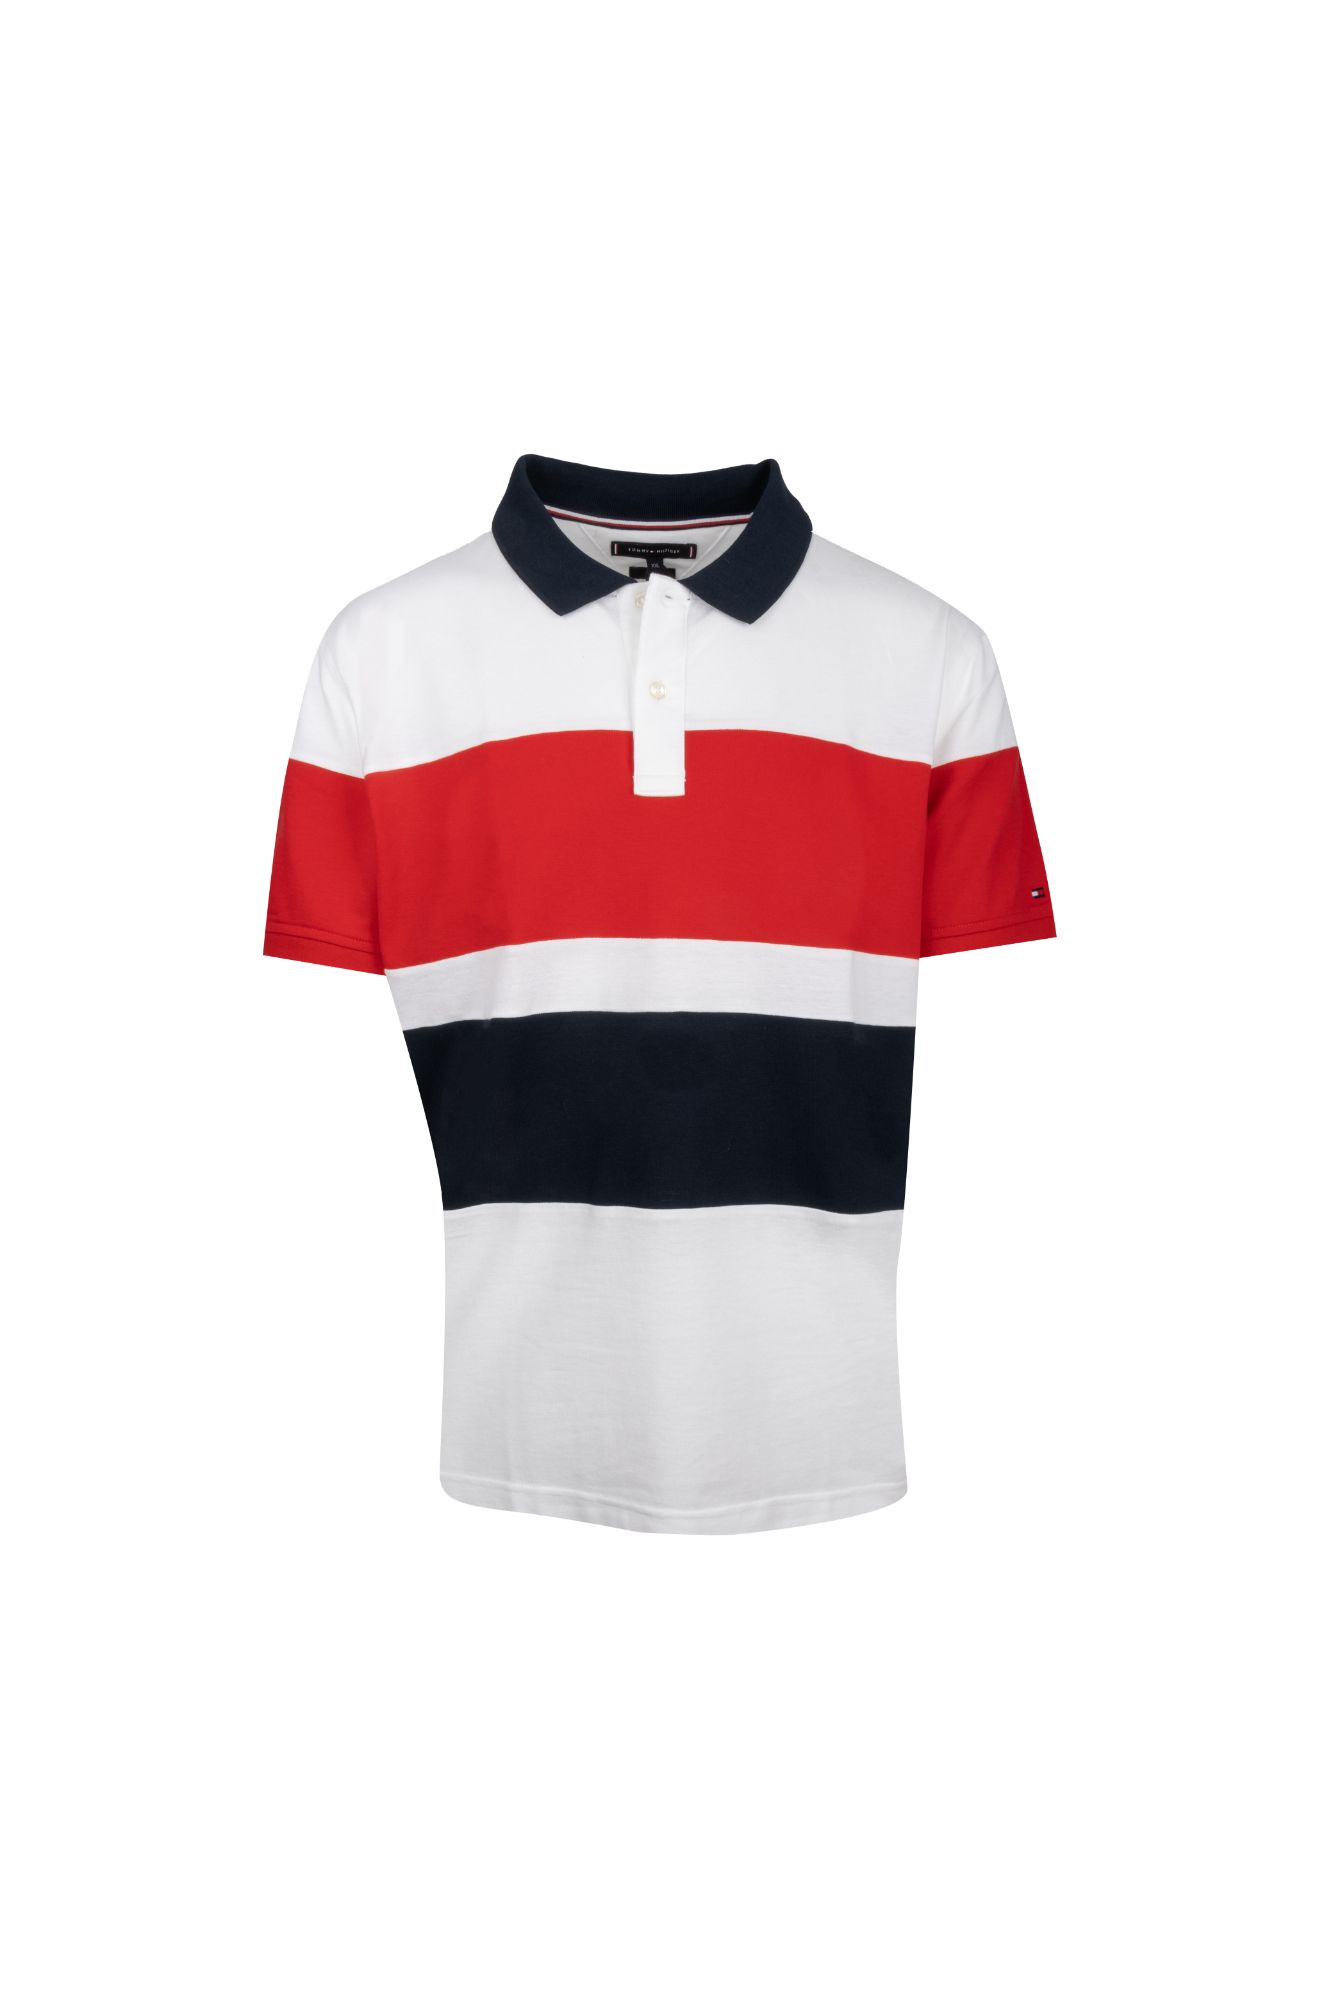 Significance Reject abstract Tricou in dungi orizontale, polo, Tommy Hilfiger, Rosu Tibetan, XXL -  eMAG.ro